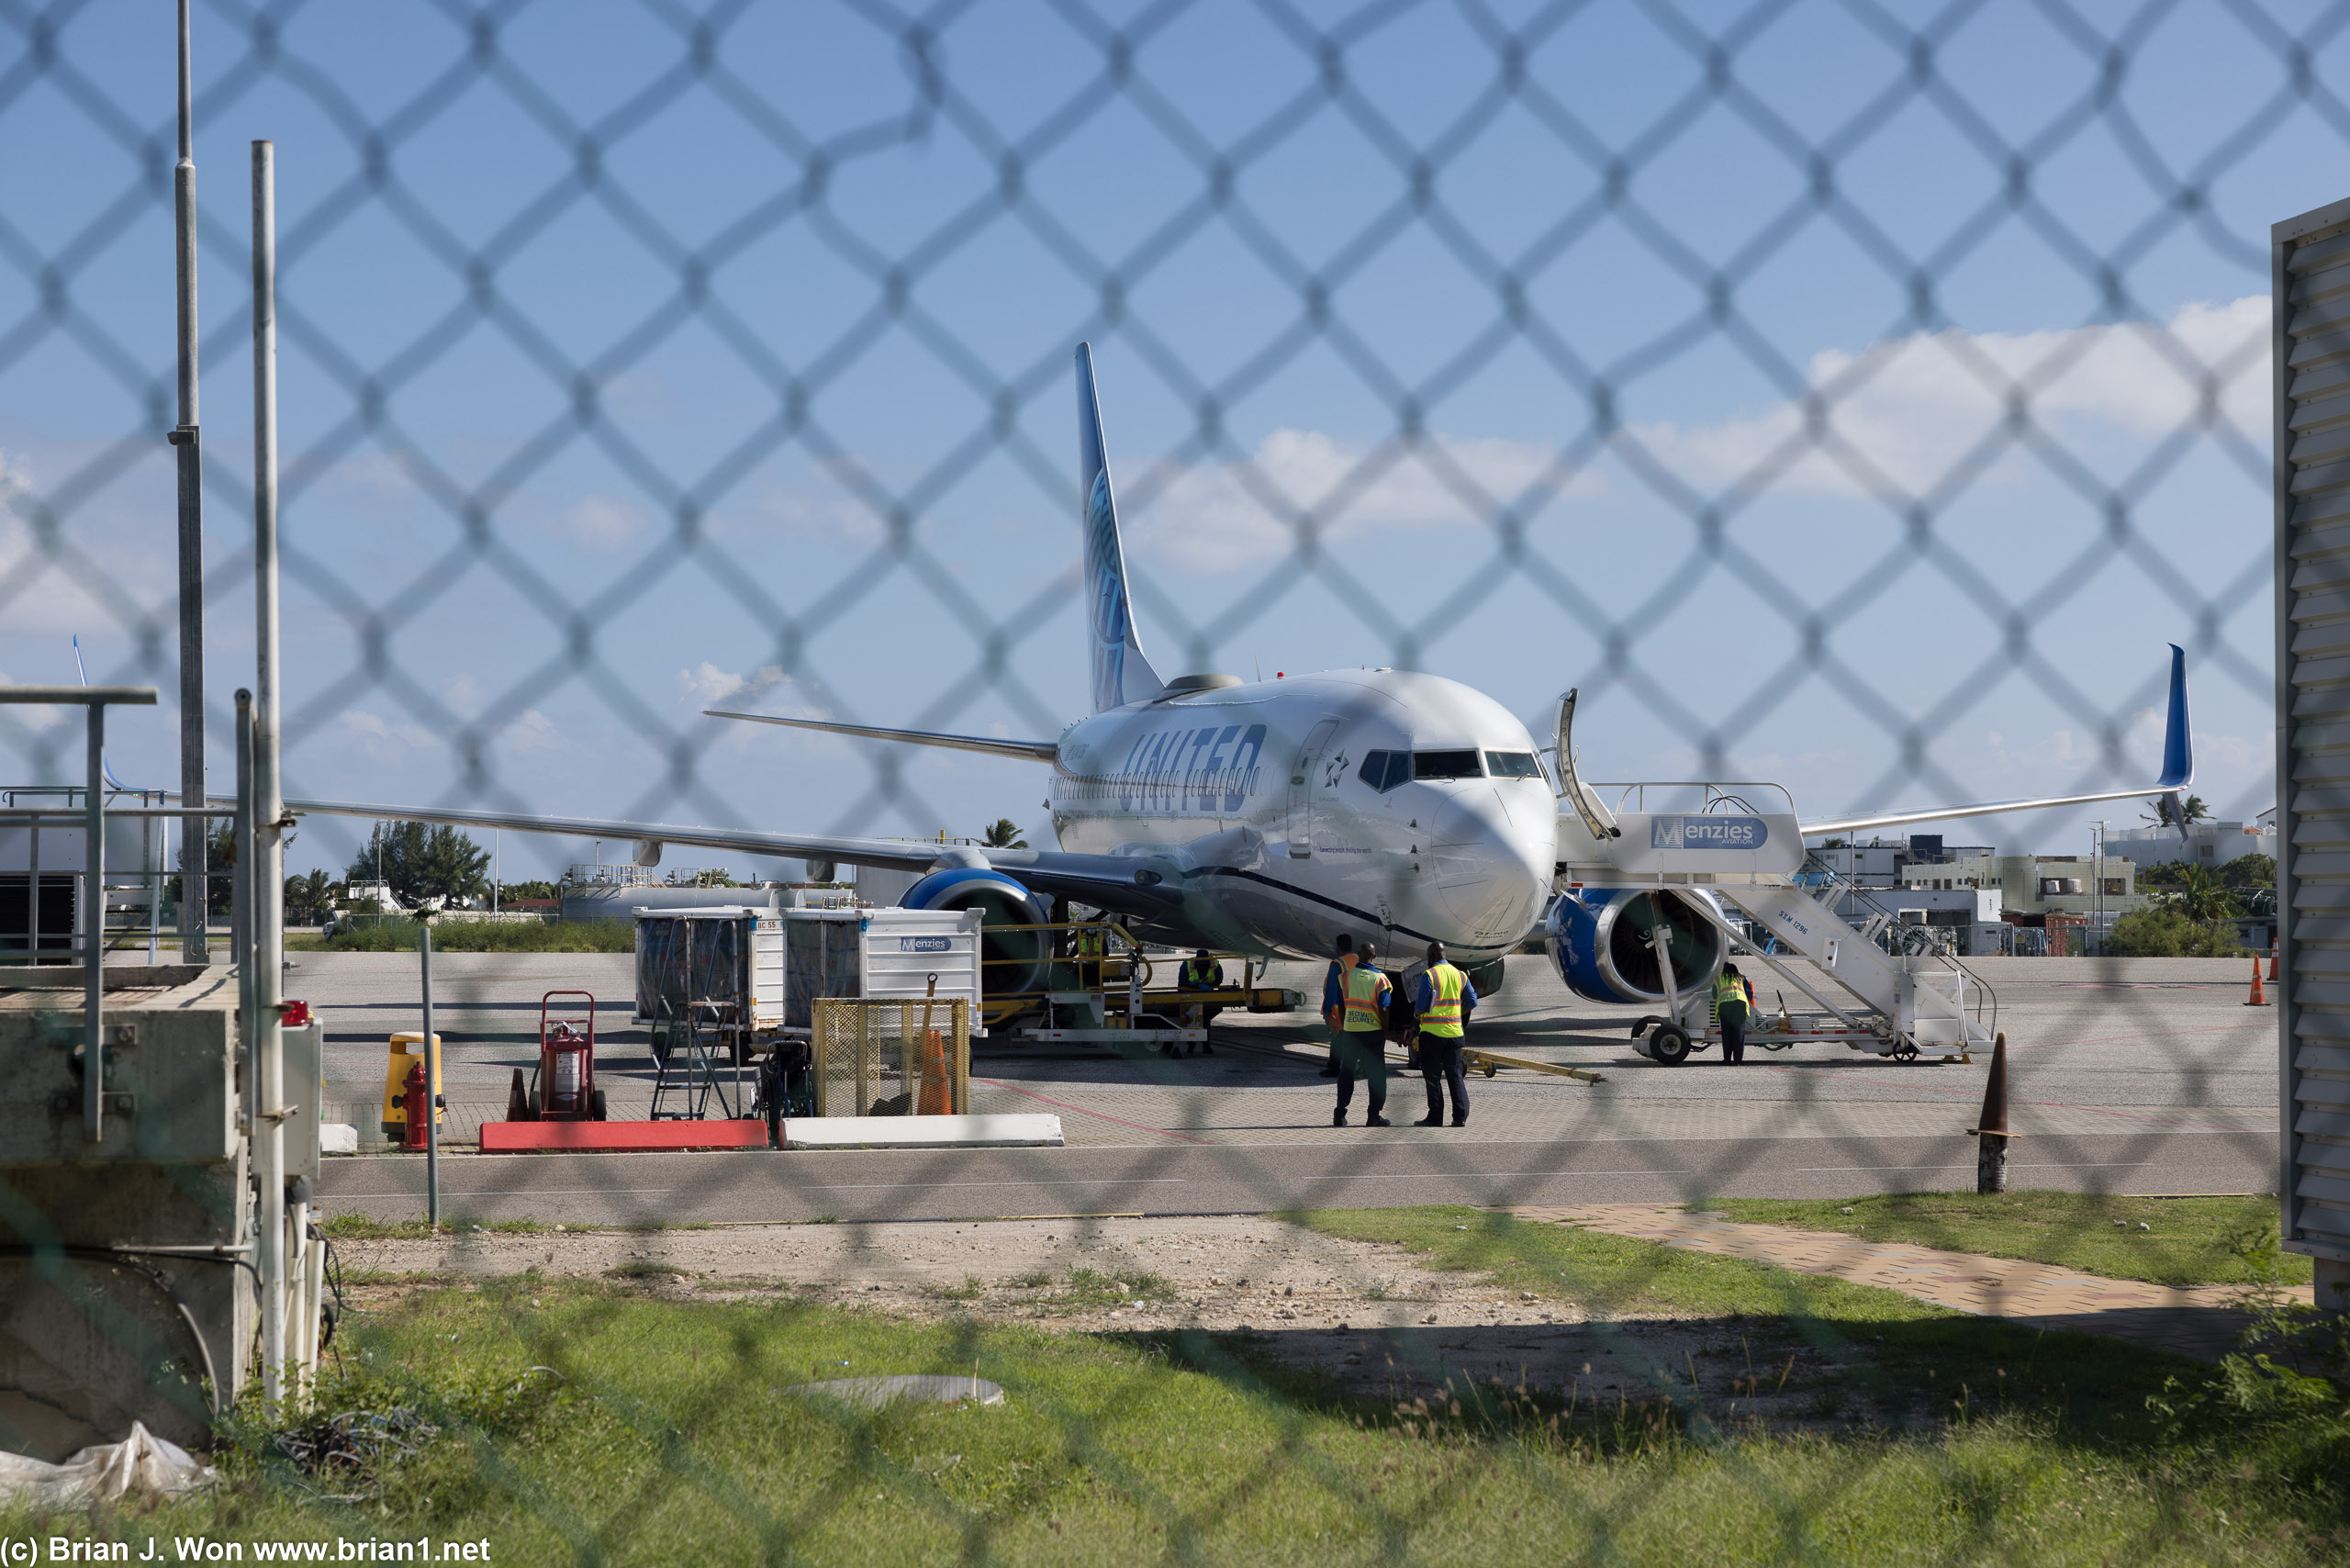 Looking through the fence at the little 737-700 that I was just on.